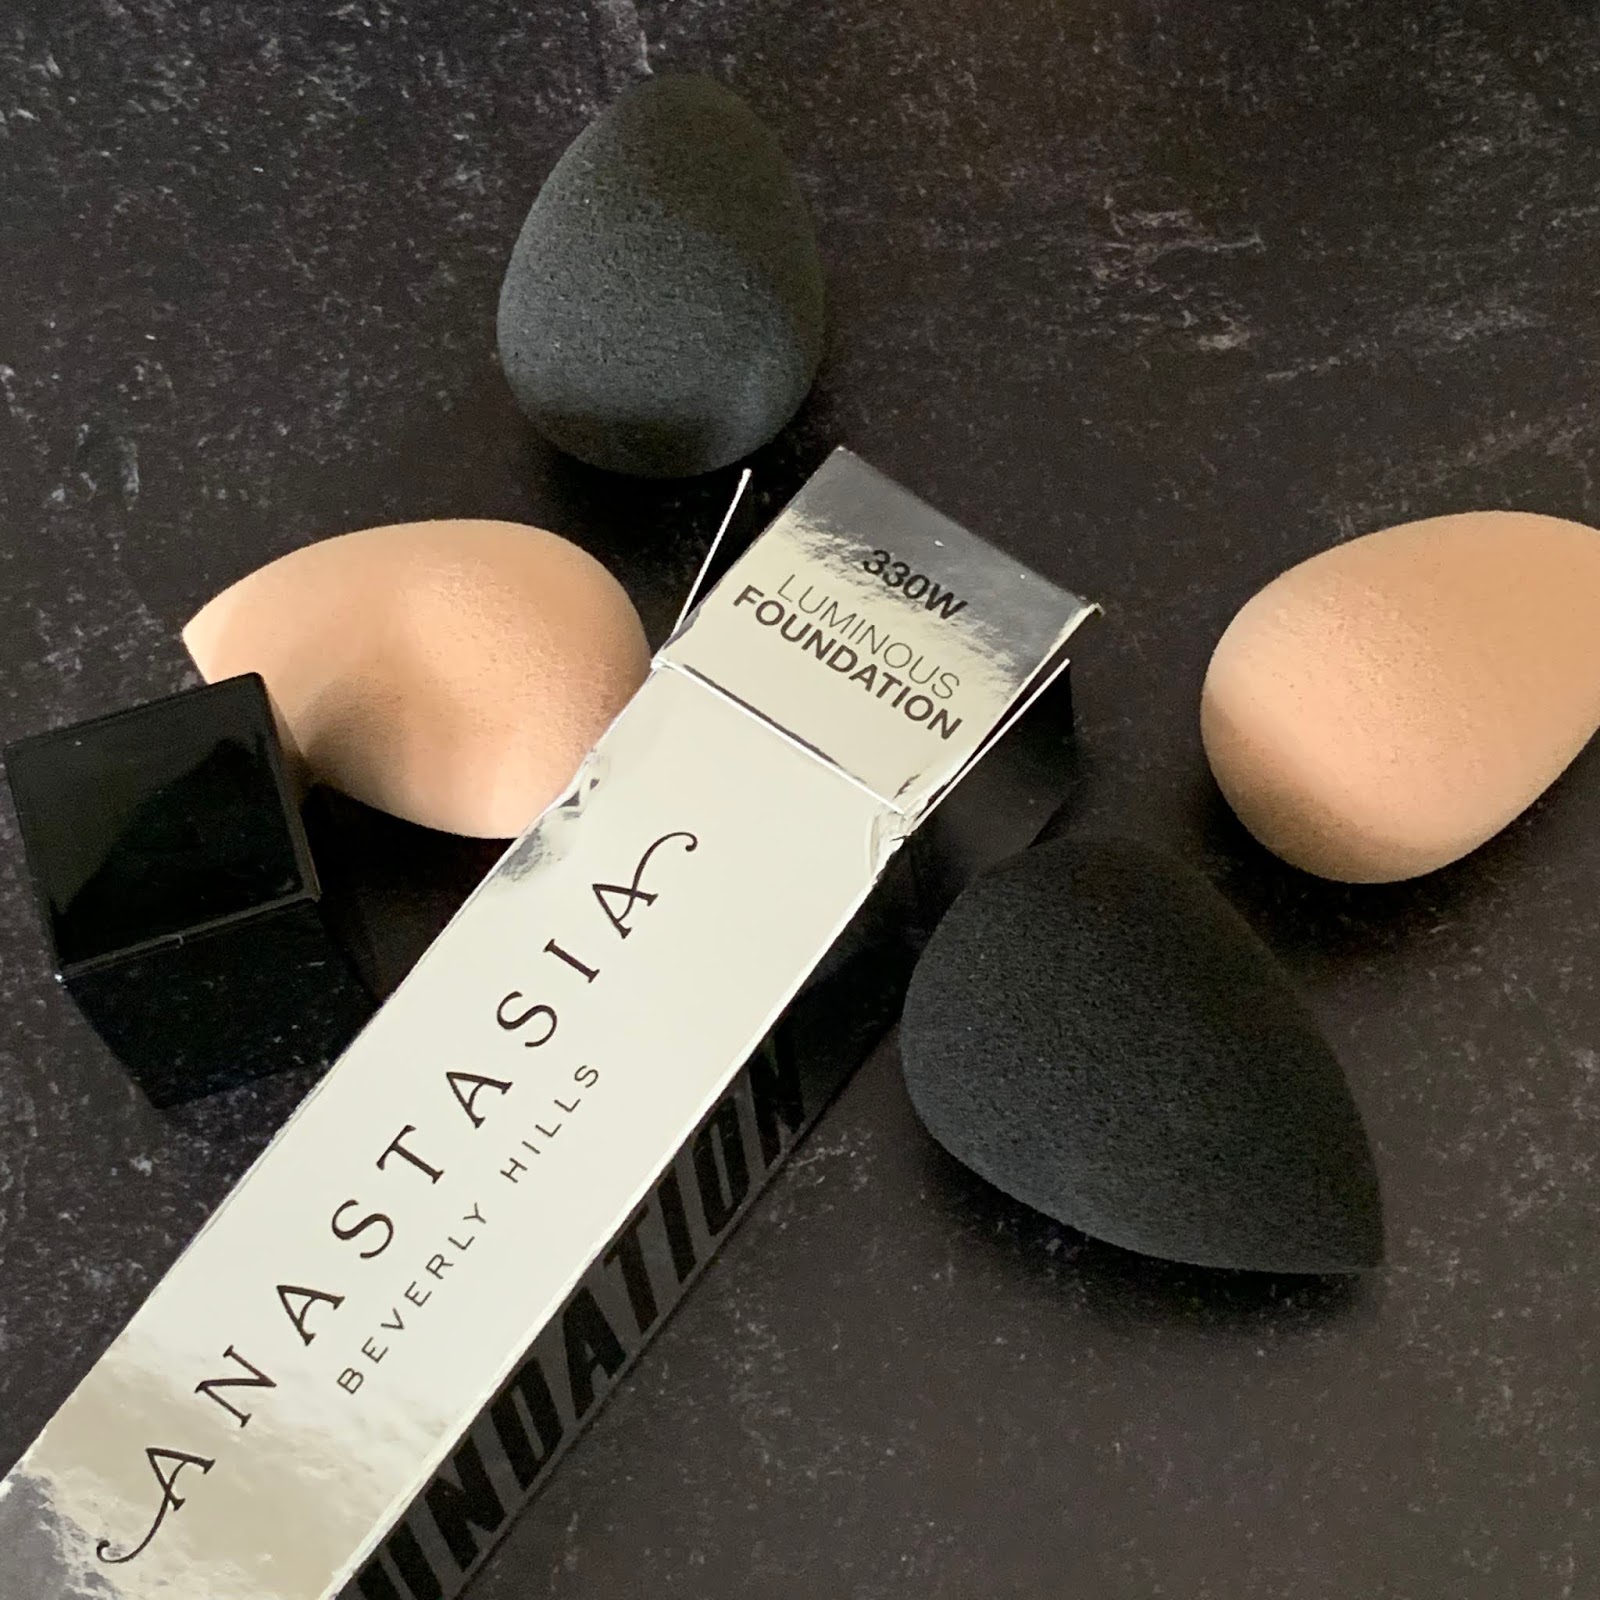 Anastasia Beverly Hills Luminous Foundation in 330W Review and Swatches | A  Very Sweet Blog